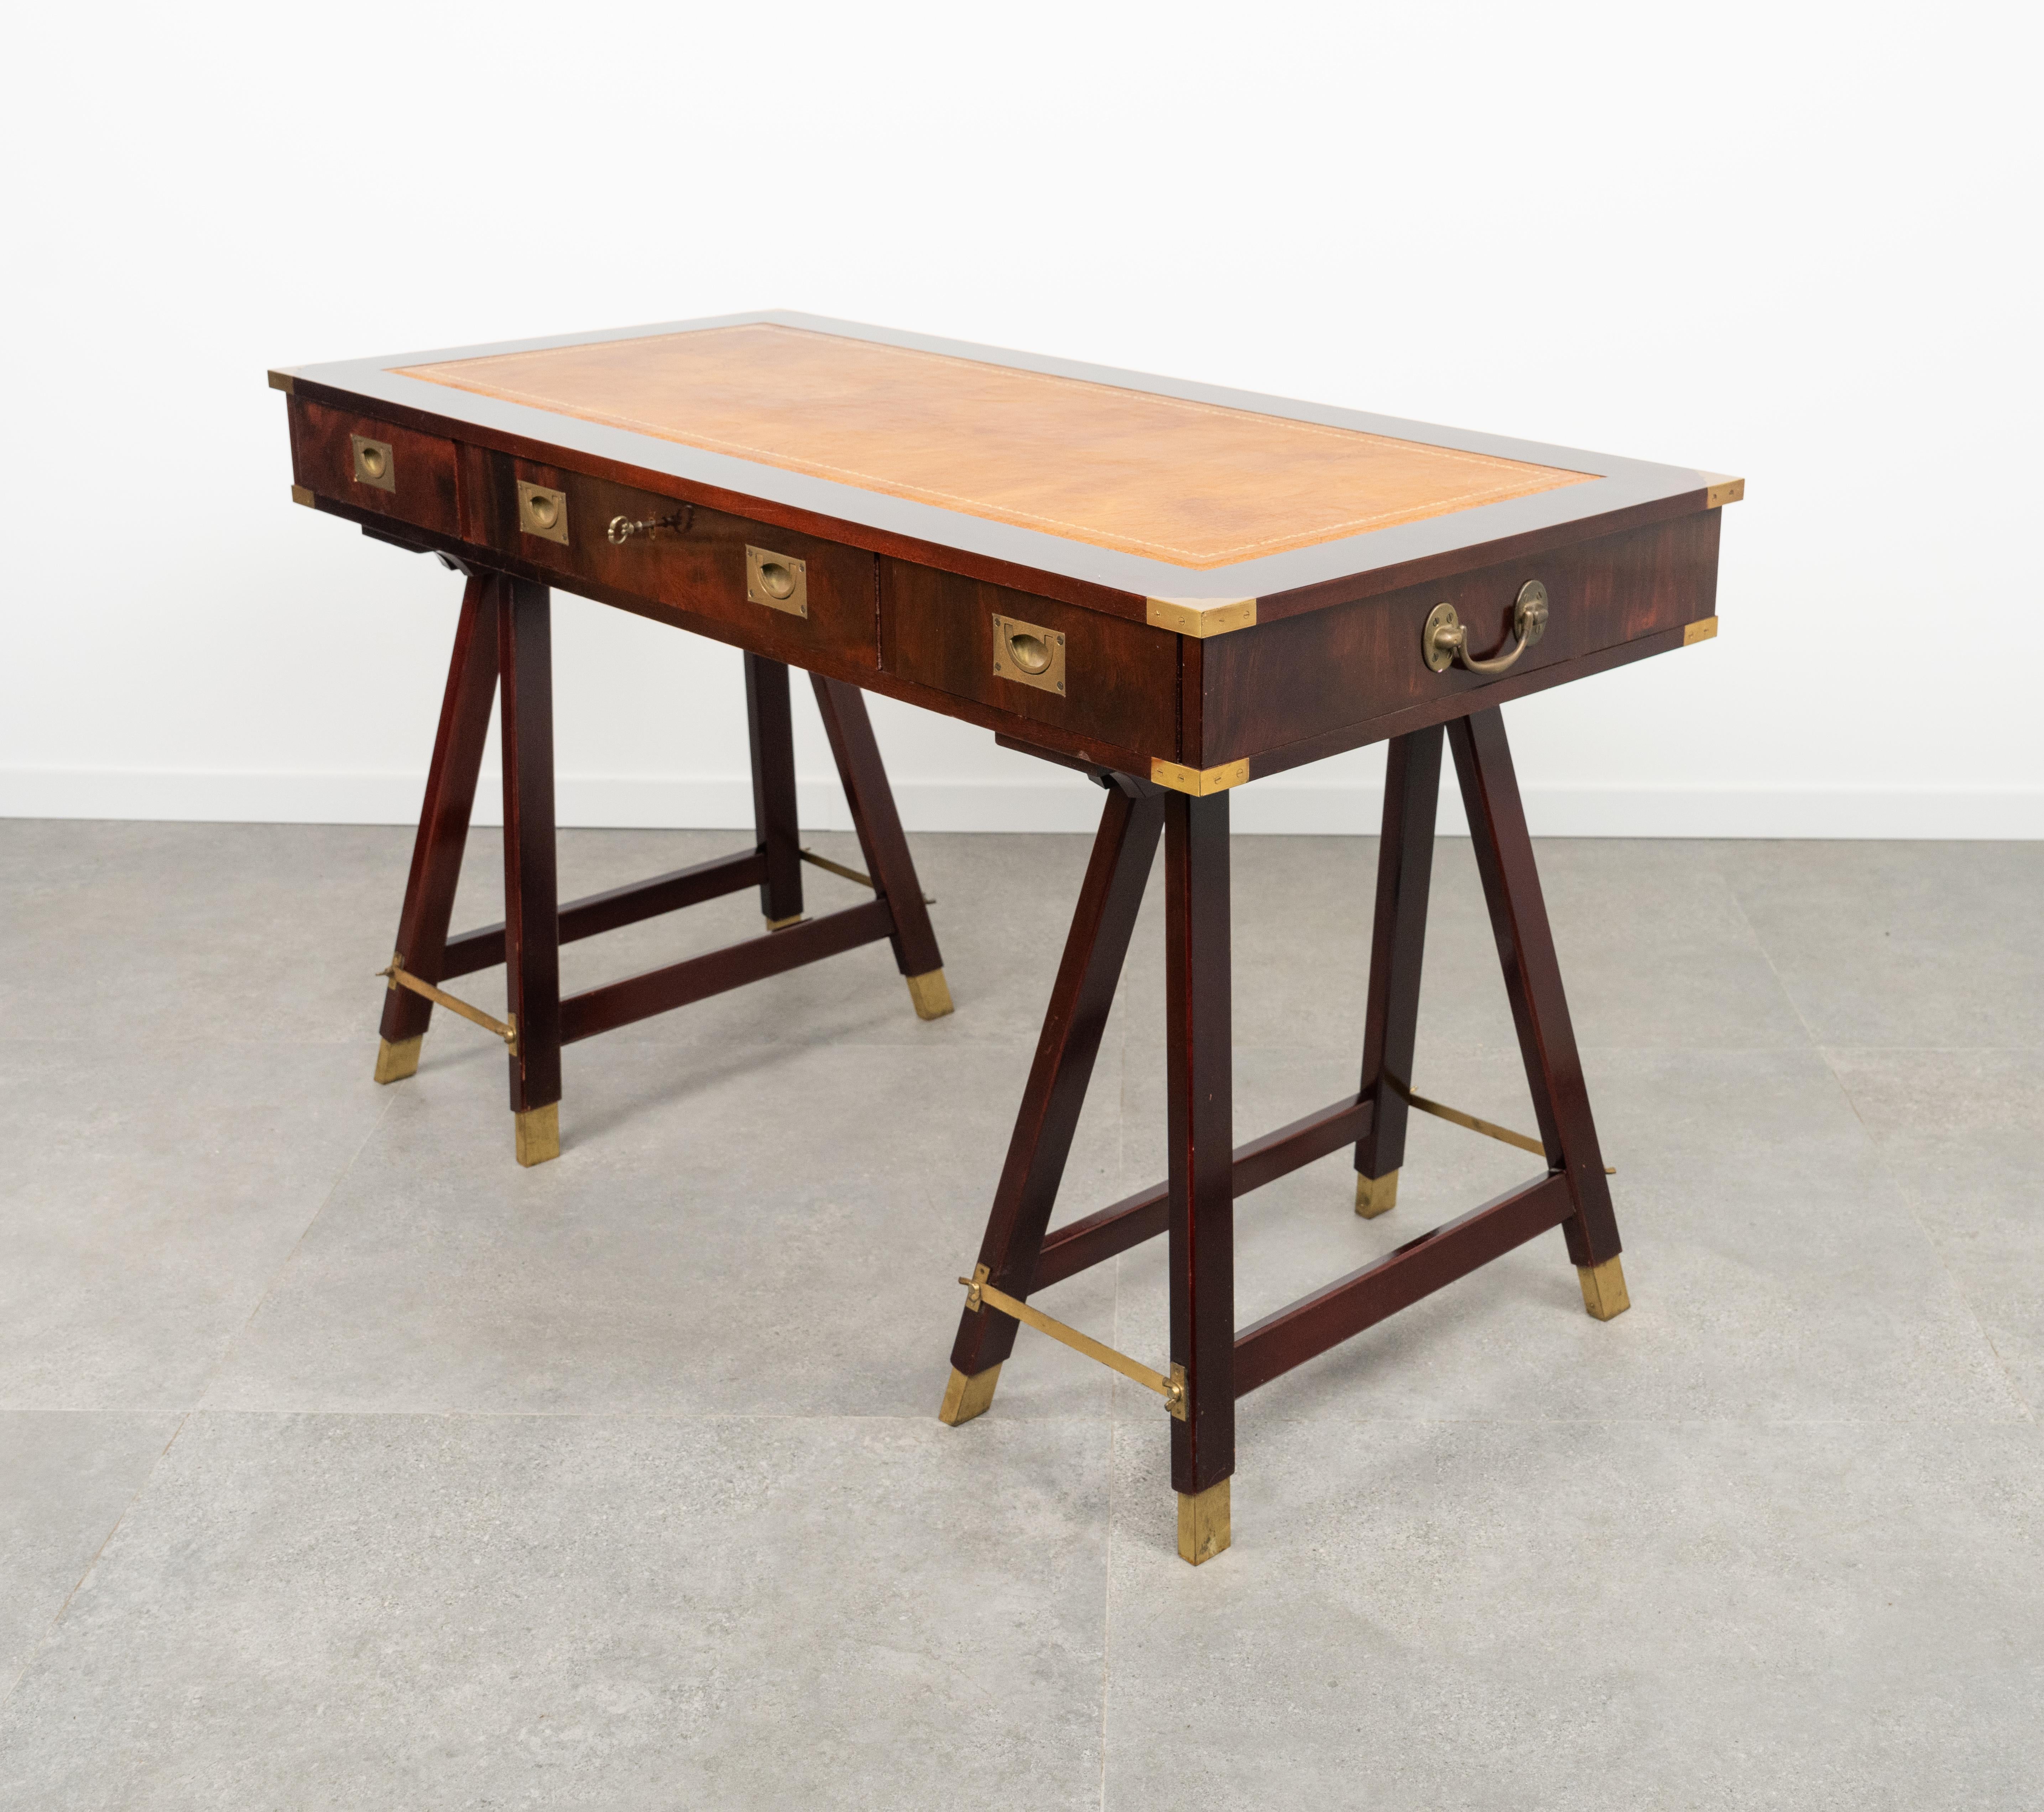 Military Campaign Style Desk Table in Wood, Brass and Leather, Italy 1960s For Sale 2